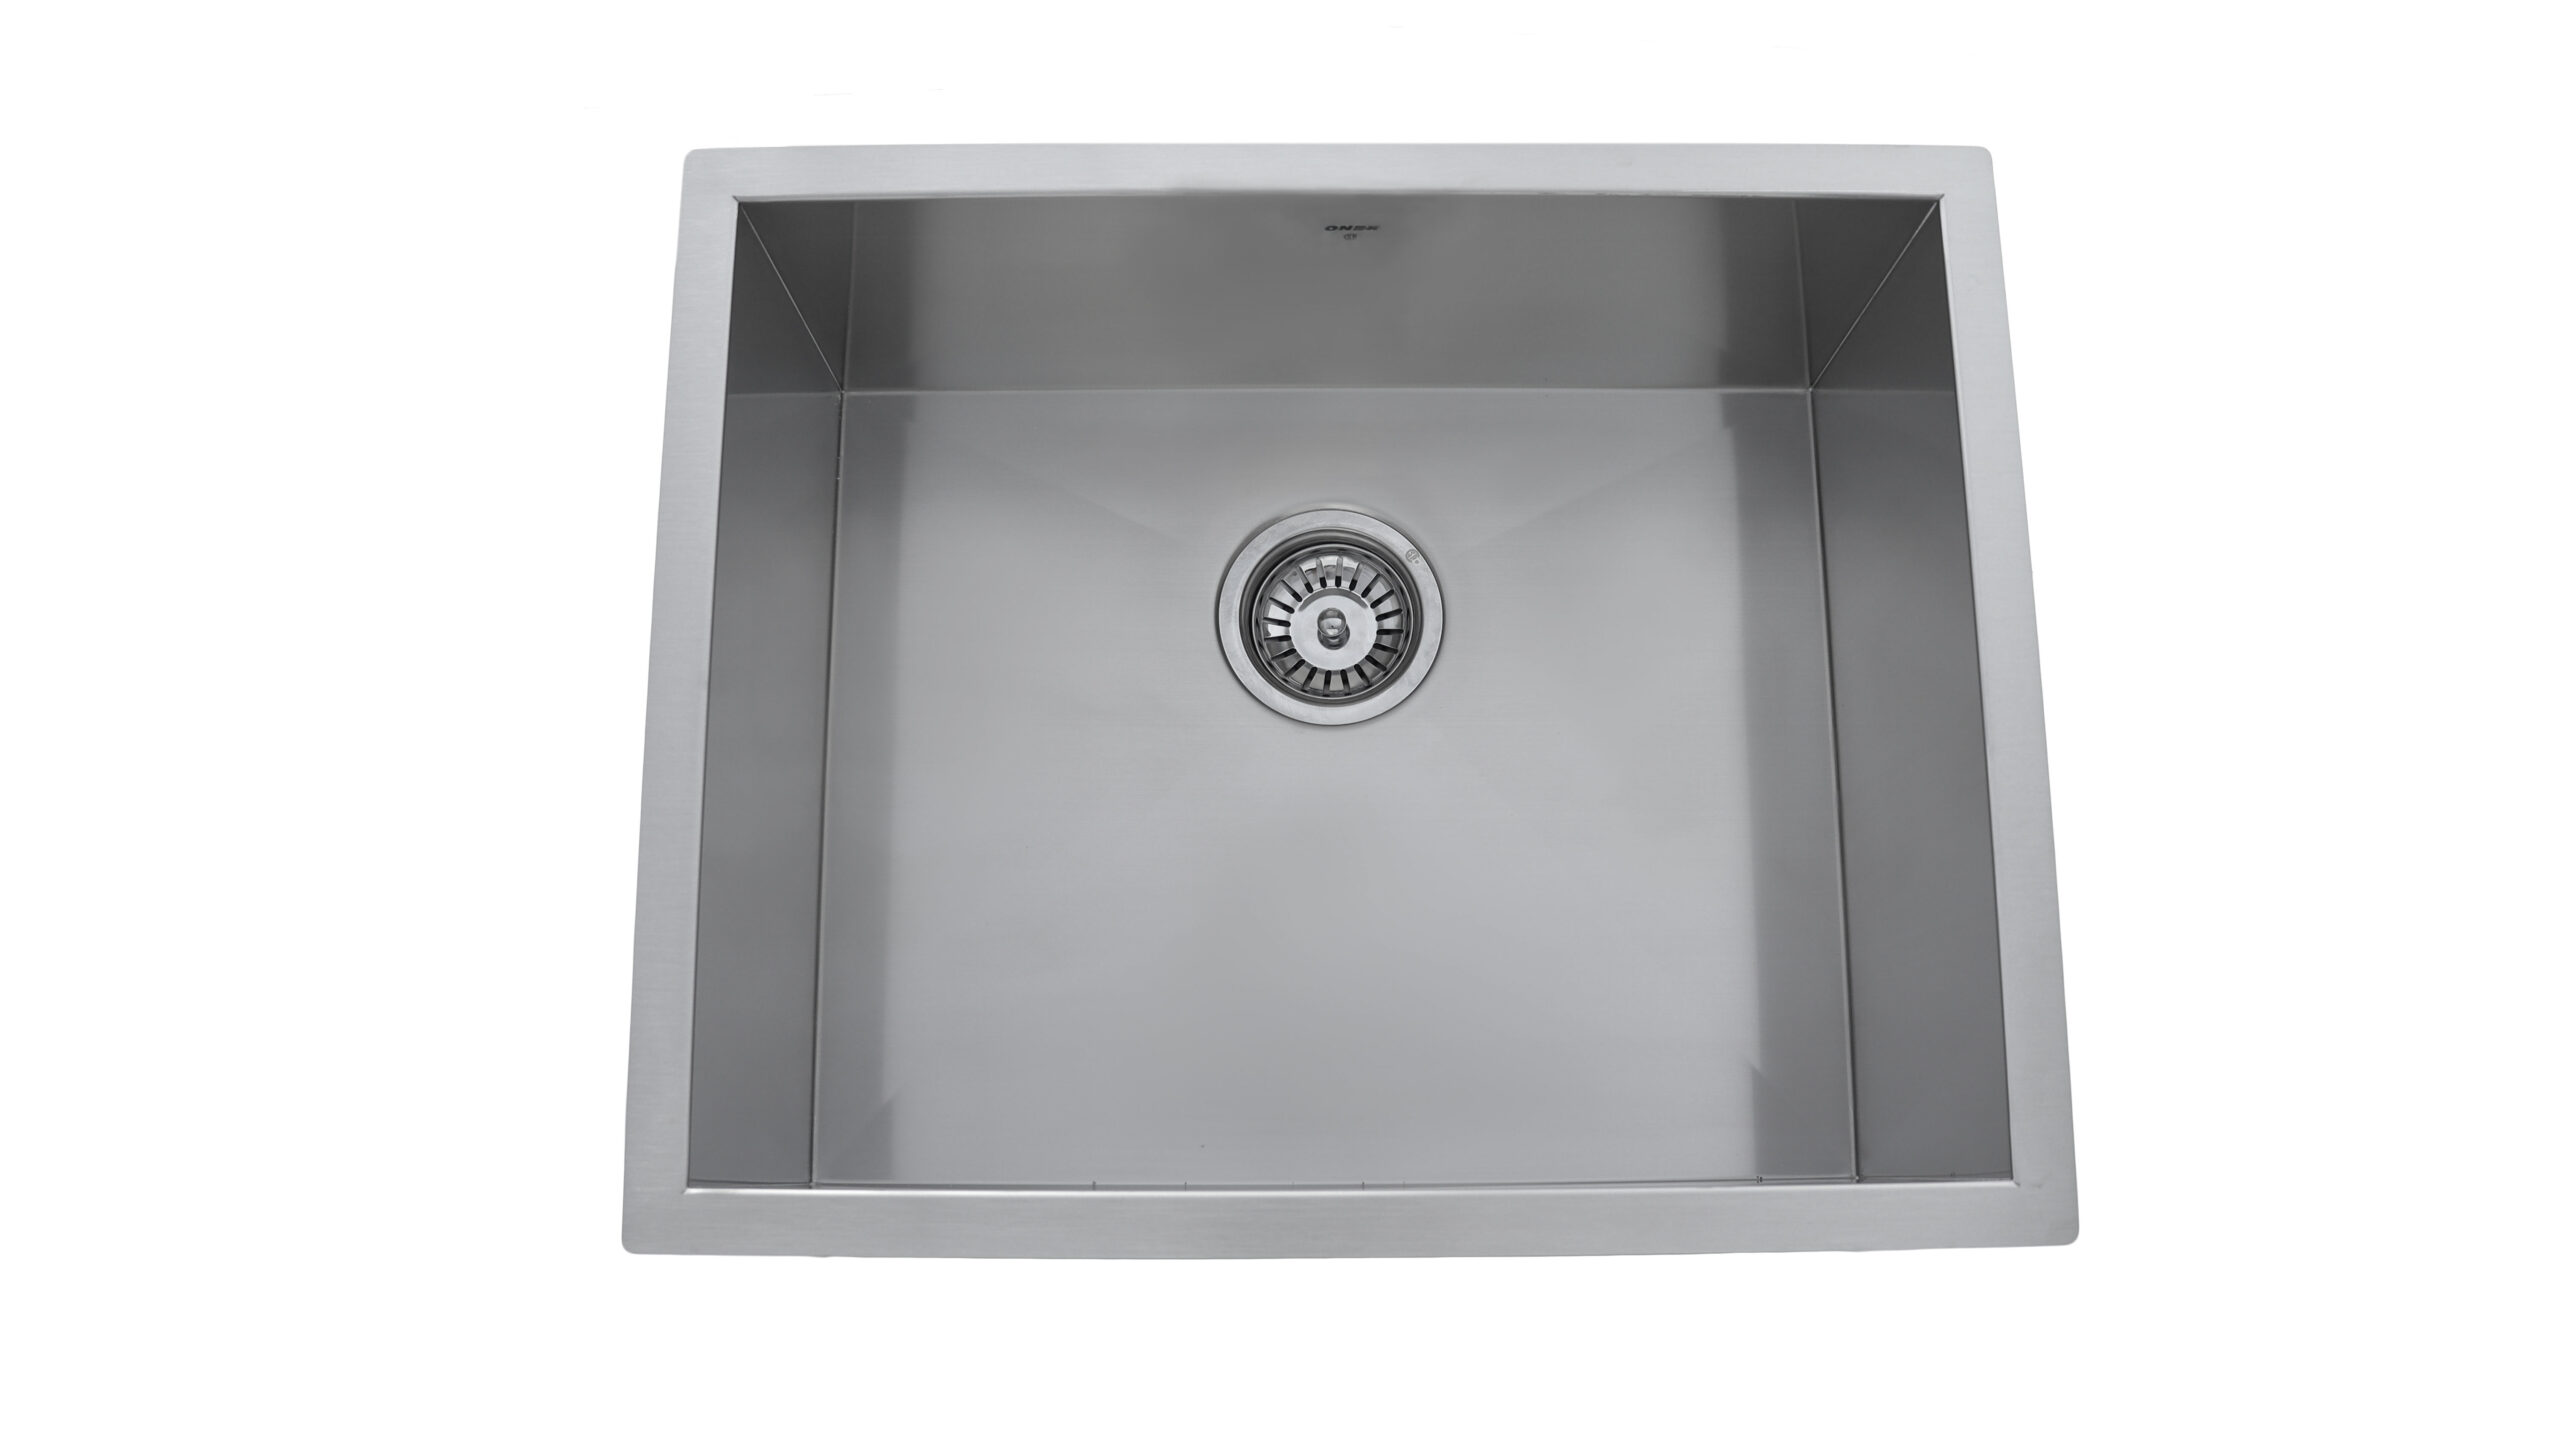 OUS2218 SQ, Single Bowl, Stainless Steel, Undermount Collection, Onex Enterprises, Kitchen Sinks in Canada